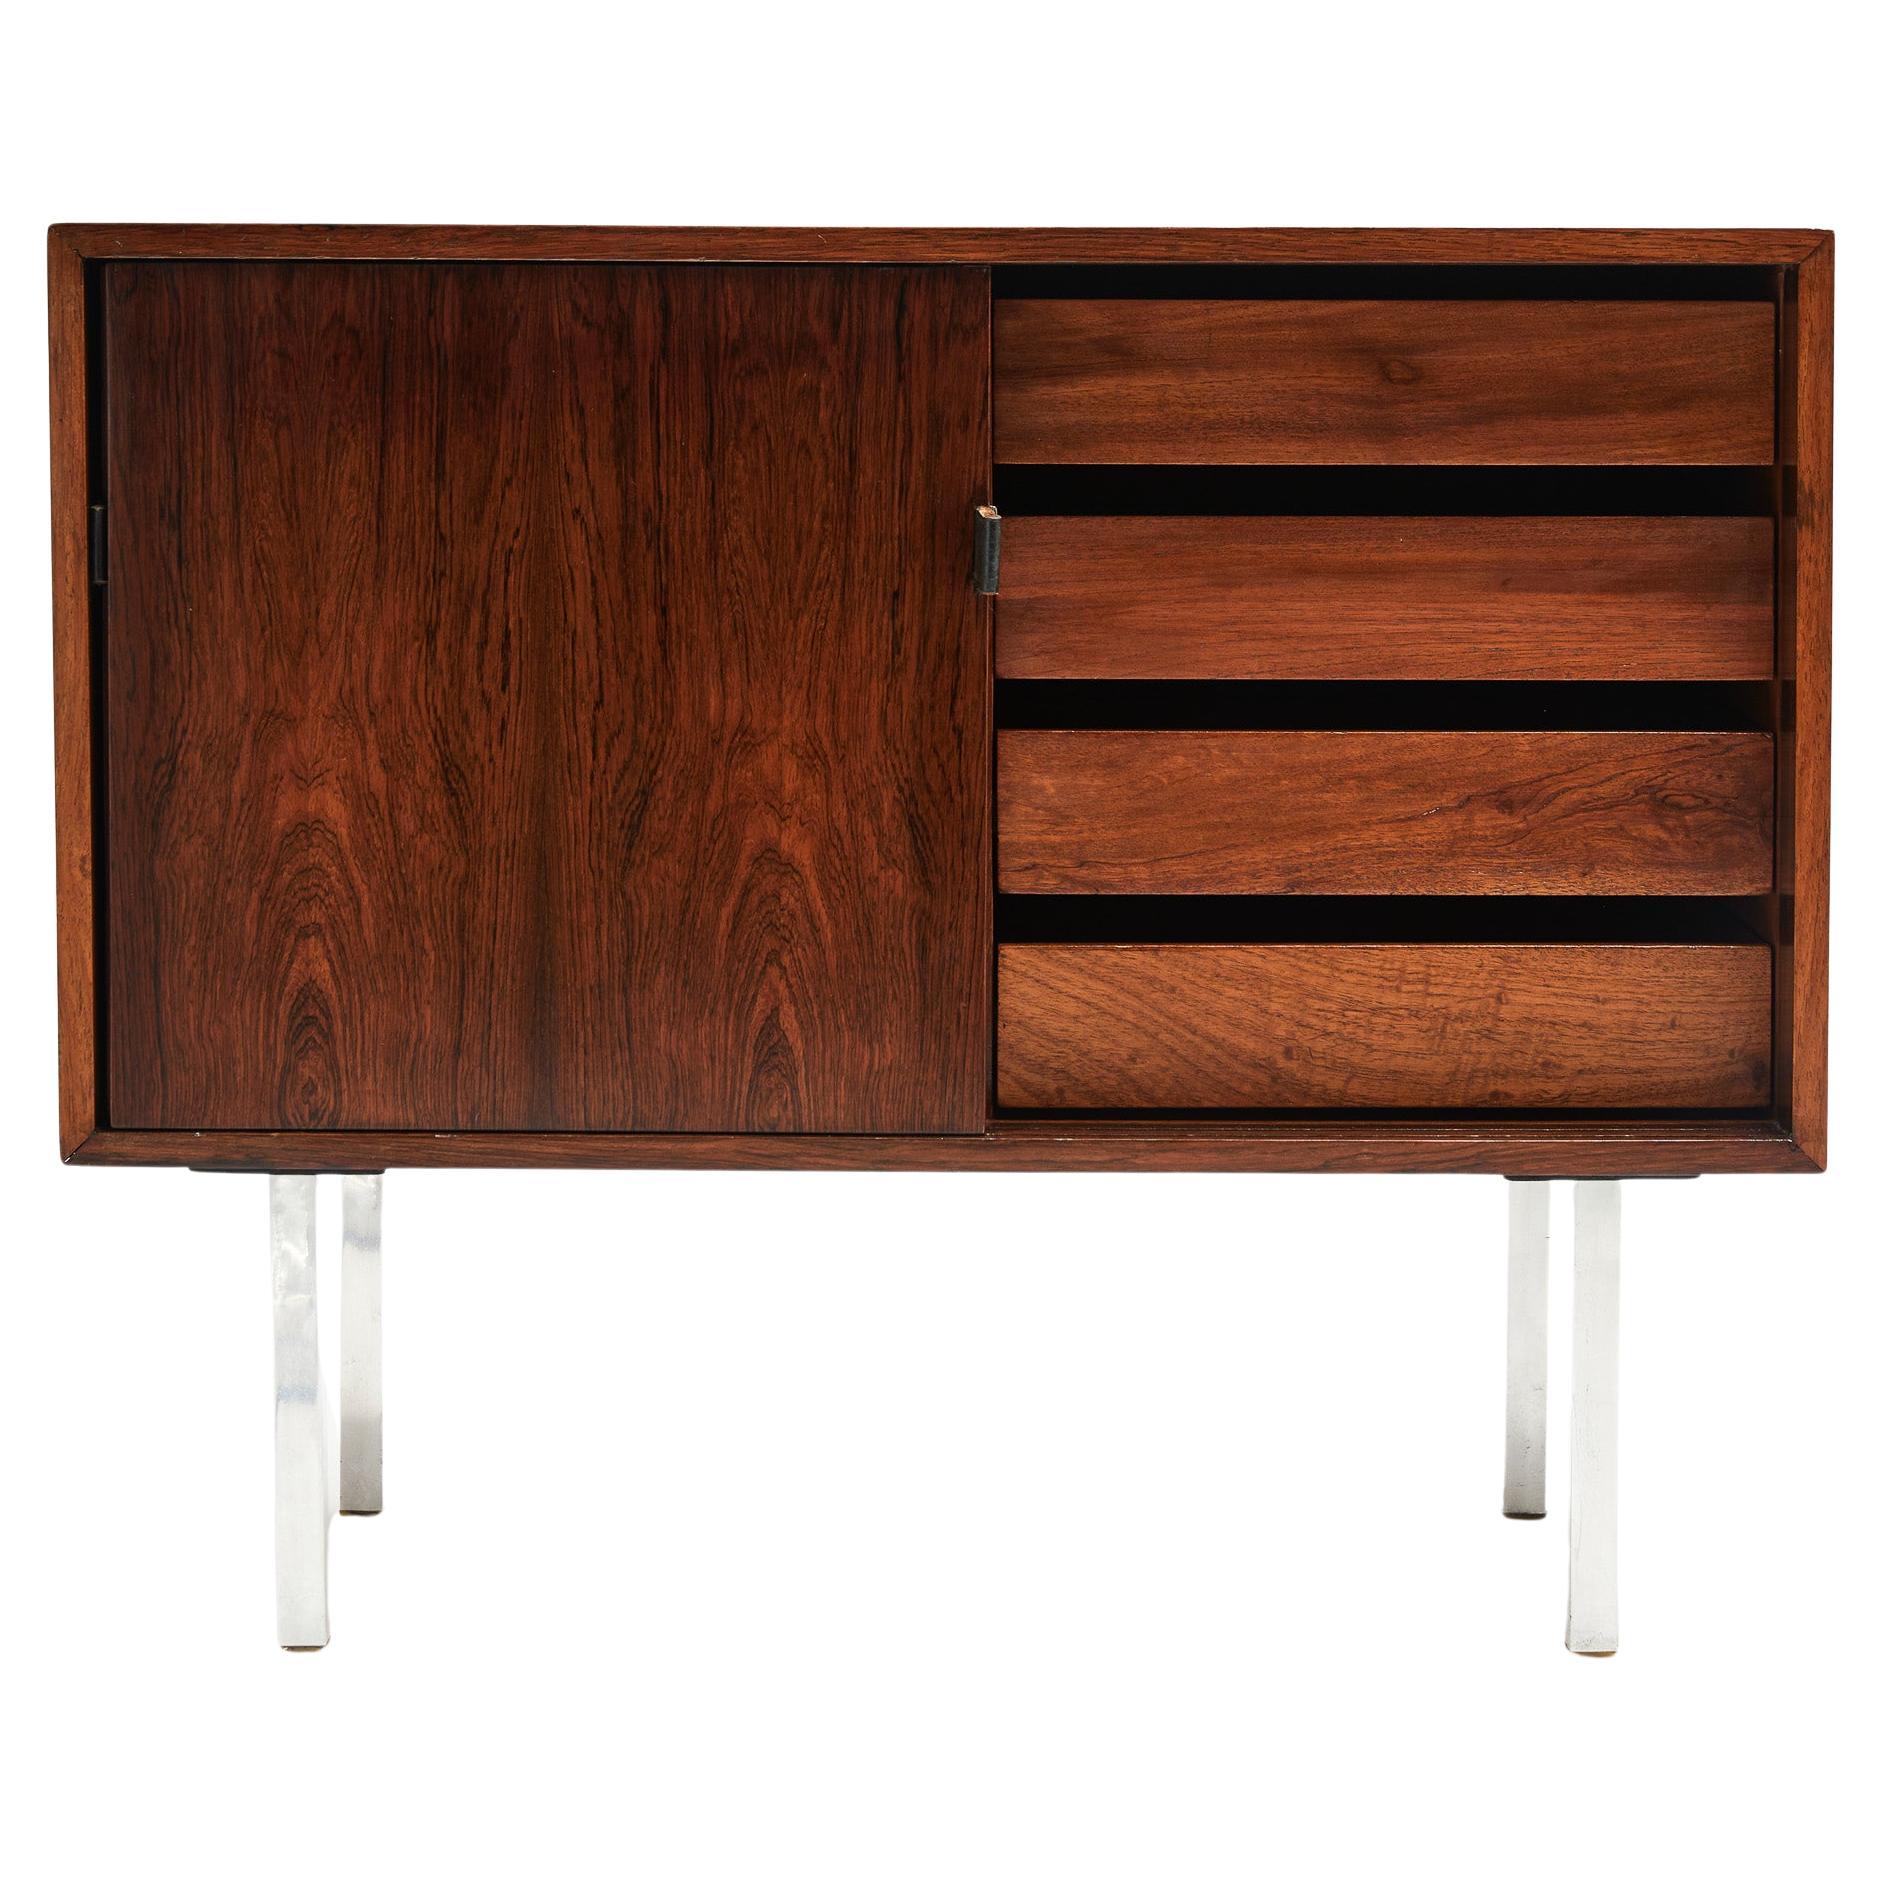 Midcentury Chest in Hardwood & Chrome by Forma Moveis, 1965 Brazil, Sealed